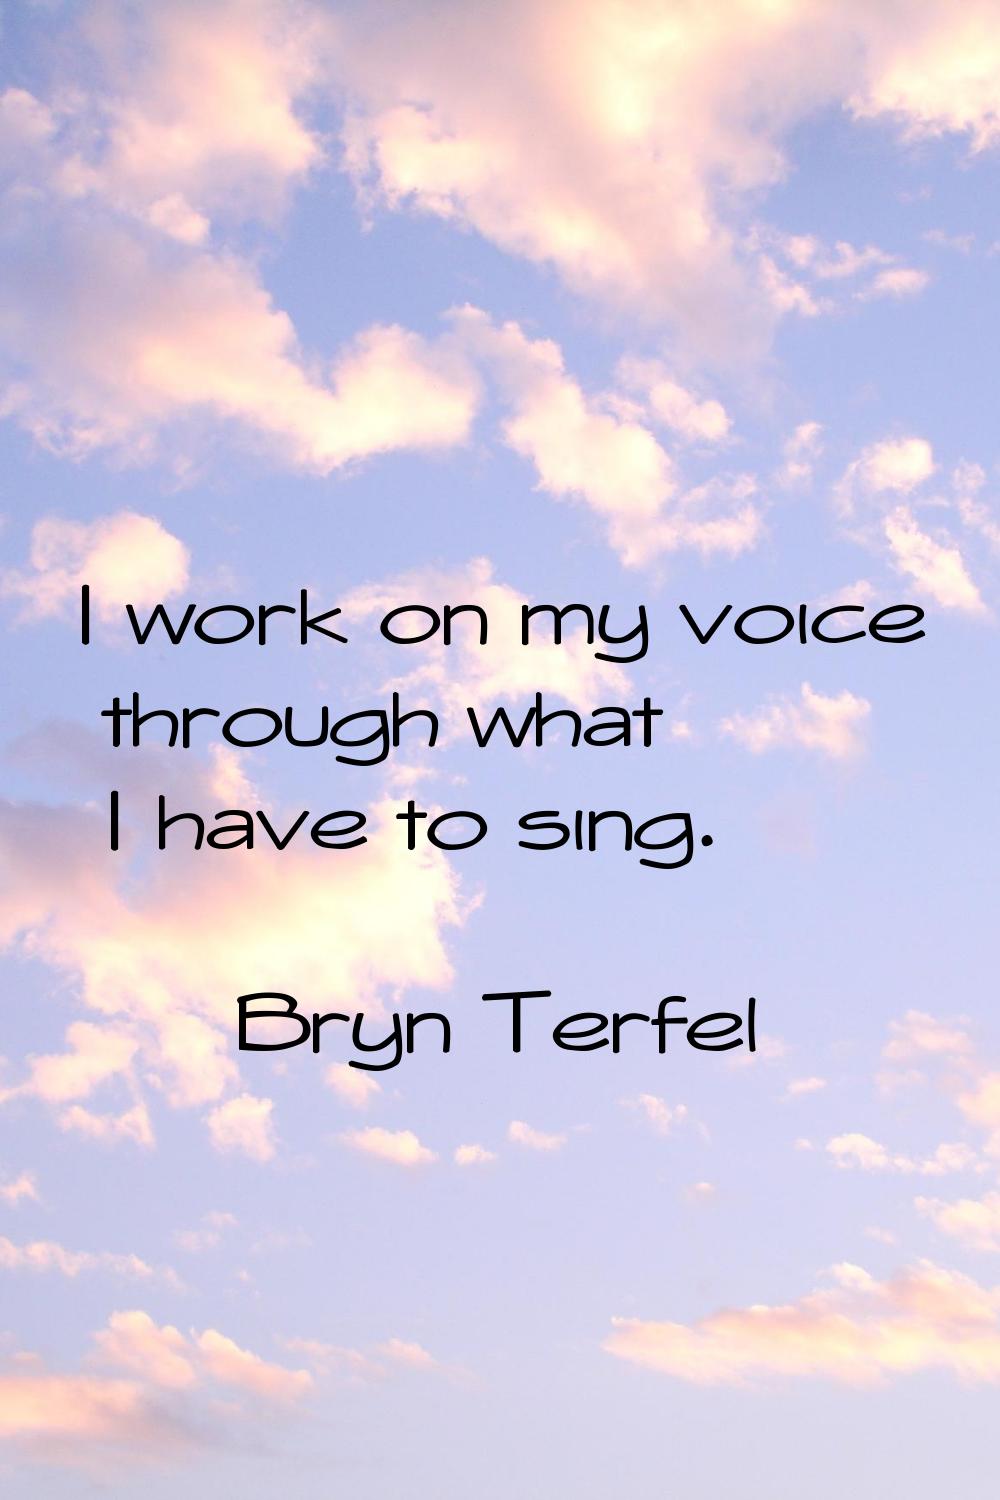 I work on my voice through what I have to sing.